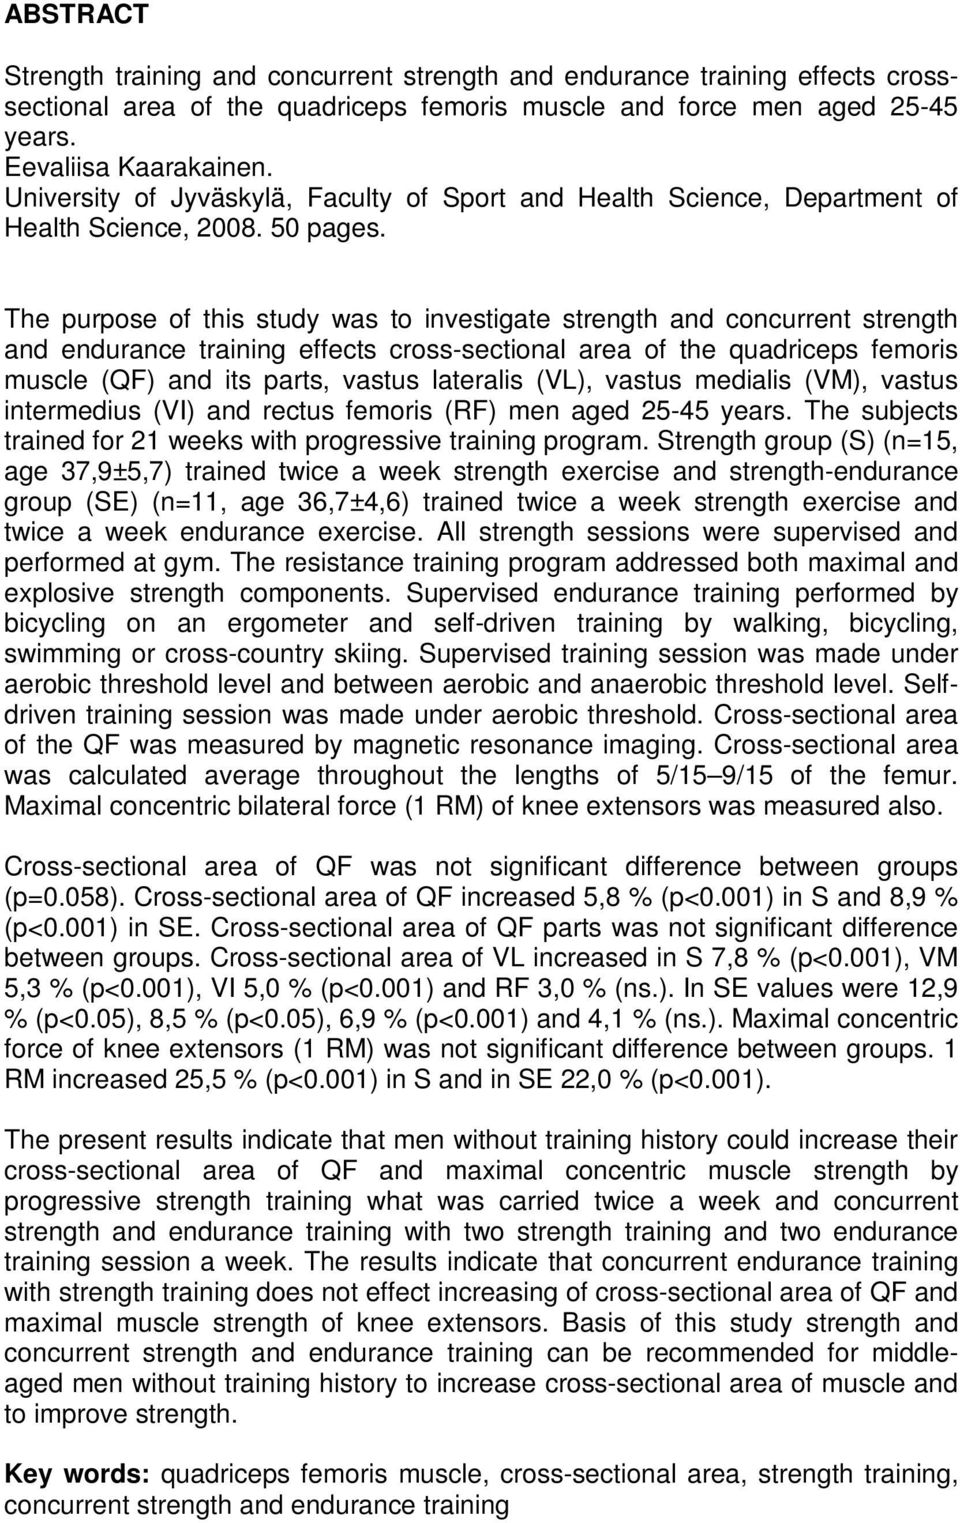 The purpose of this study was to investigate strength and concurrent strength and endurance training effects cross-sectional area of the quadriceps femoris muscle (QF) and its parts, vastus lateralis